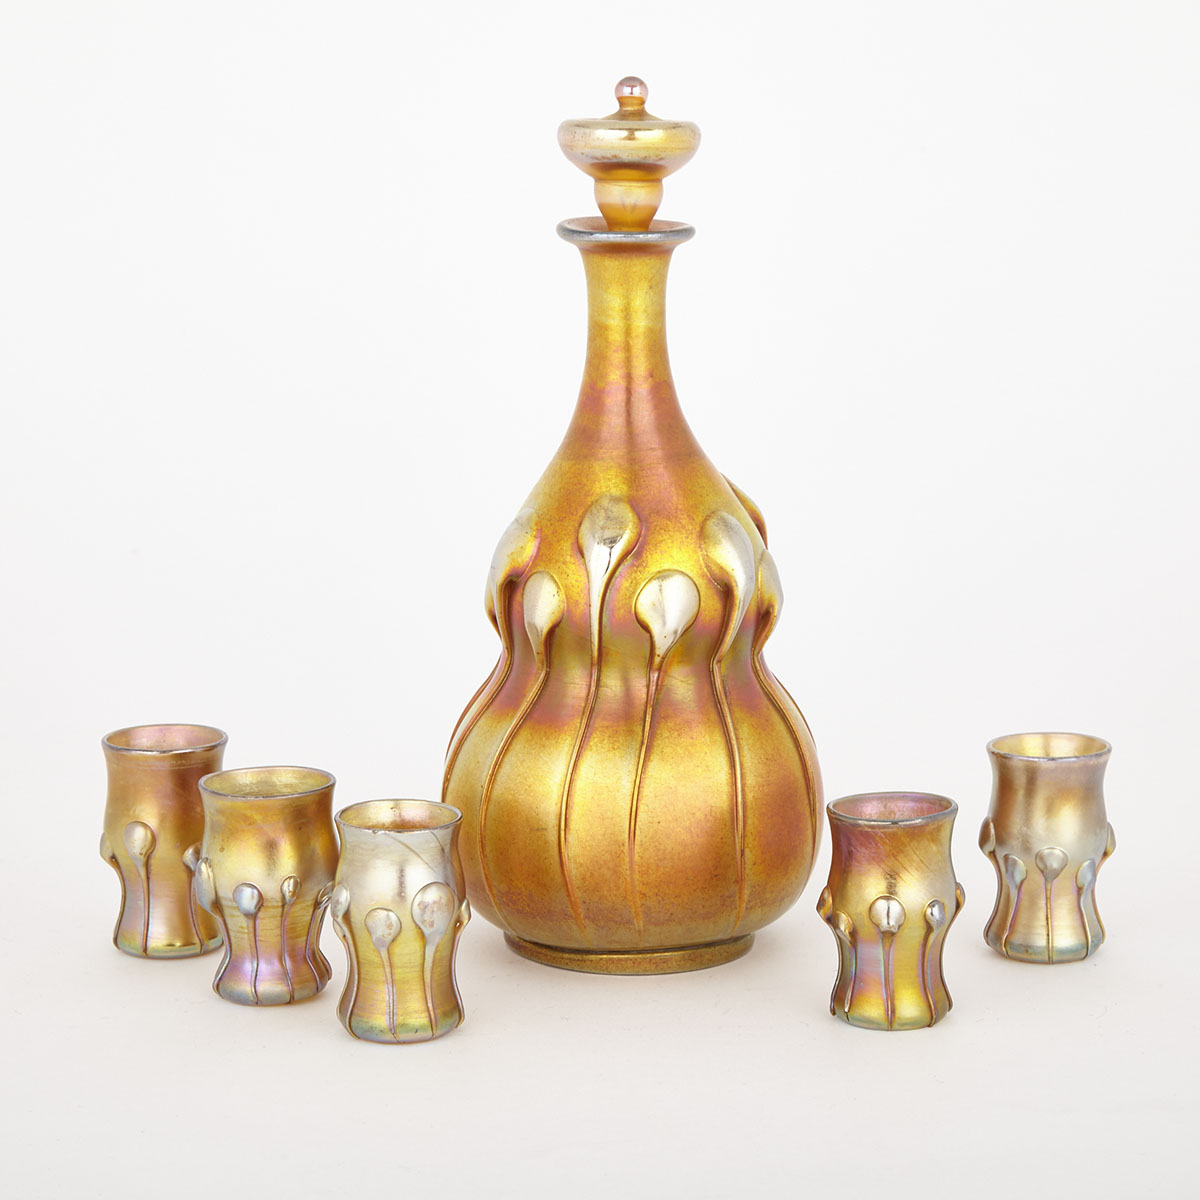 Tiffany ‘Favrile’ Iridescent Glass Decanter and Five Glasses, early 20th century